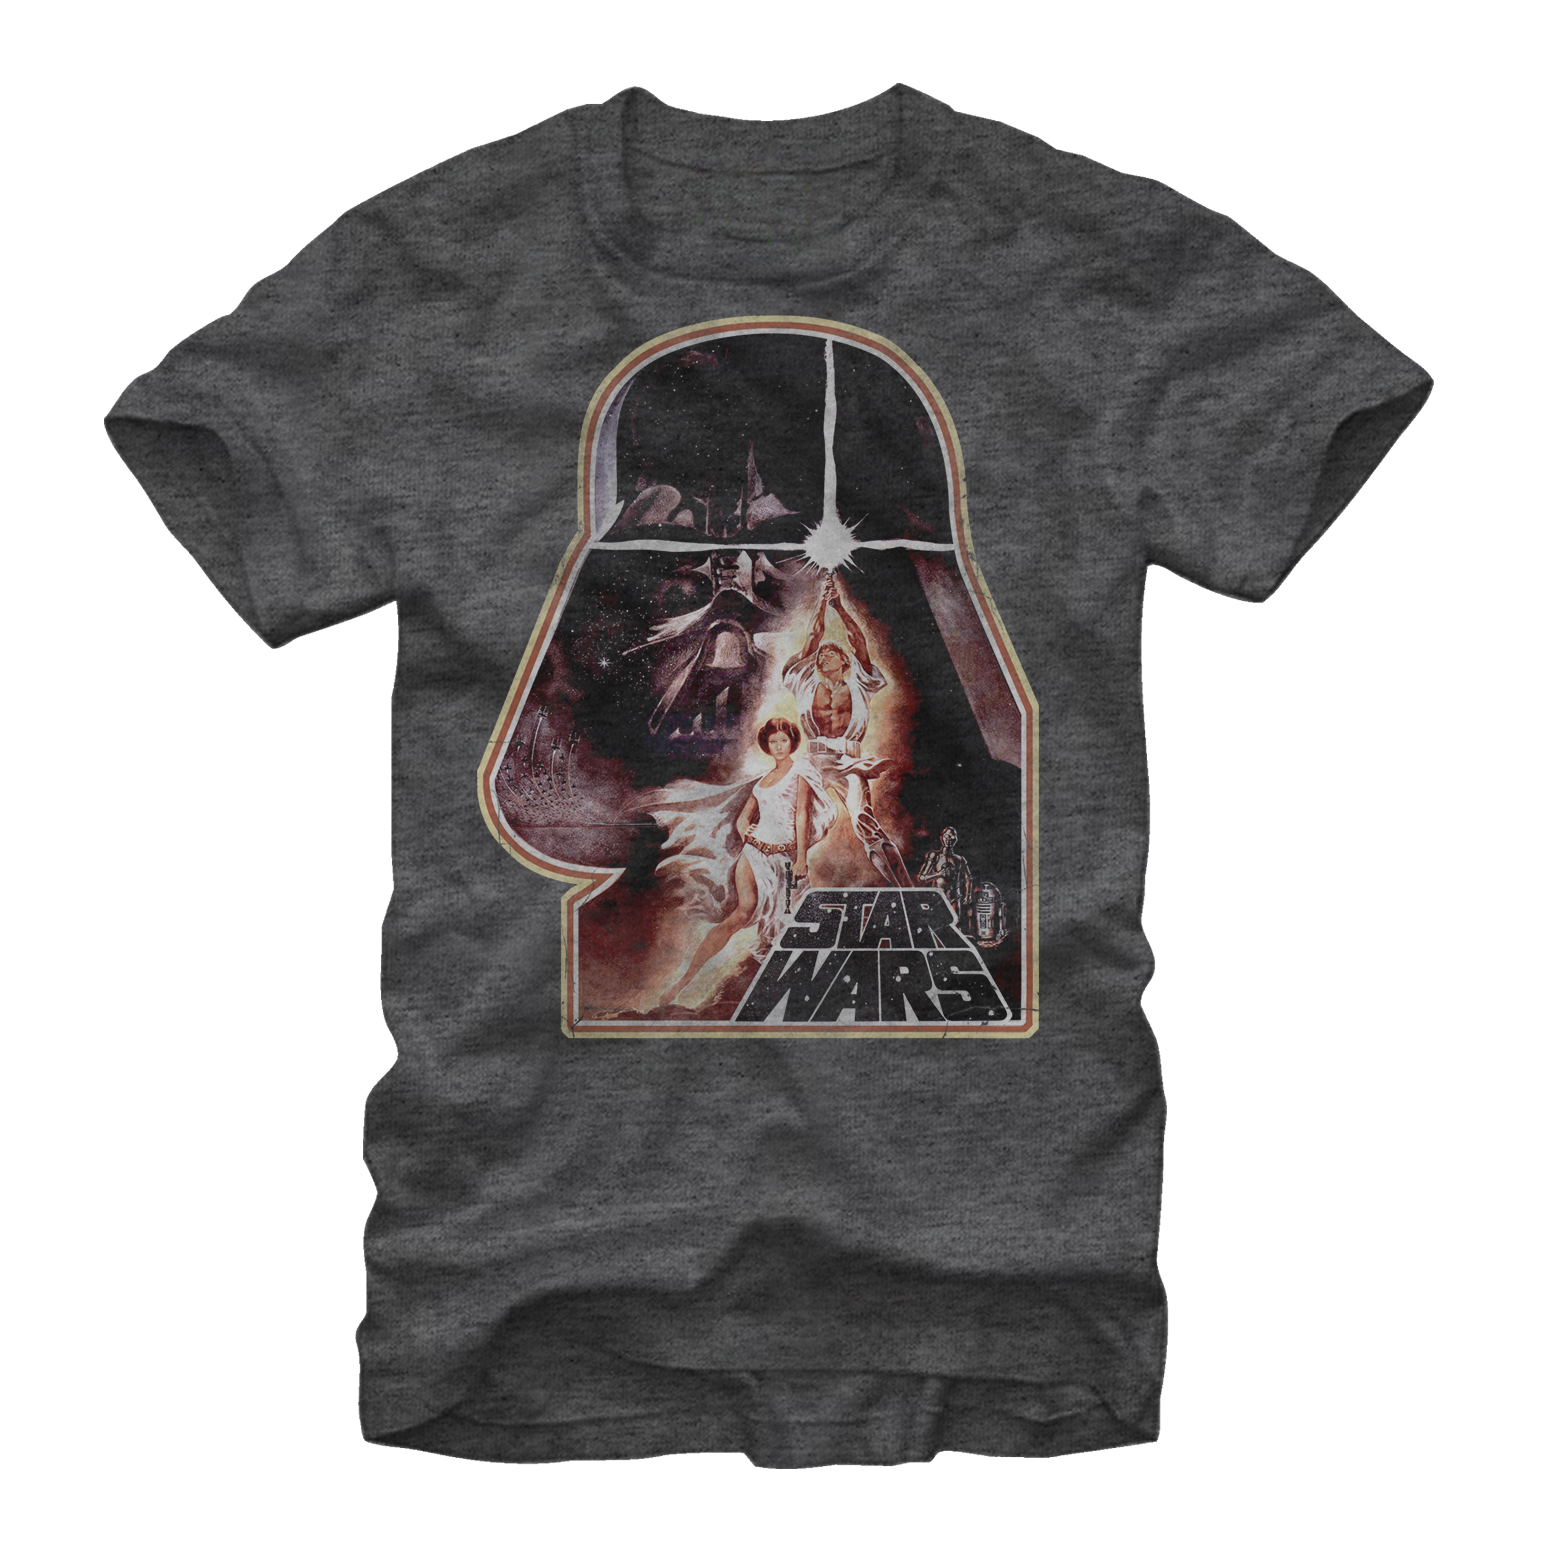 Men's Star Wars Skywalker  Graphic Tee Charcoal Heather 3X Large - image 1 of 4